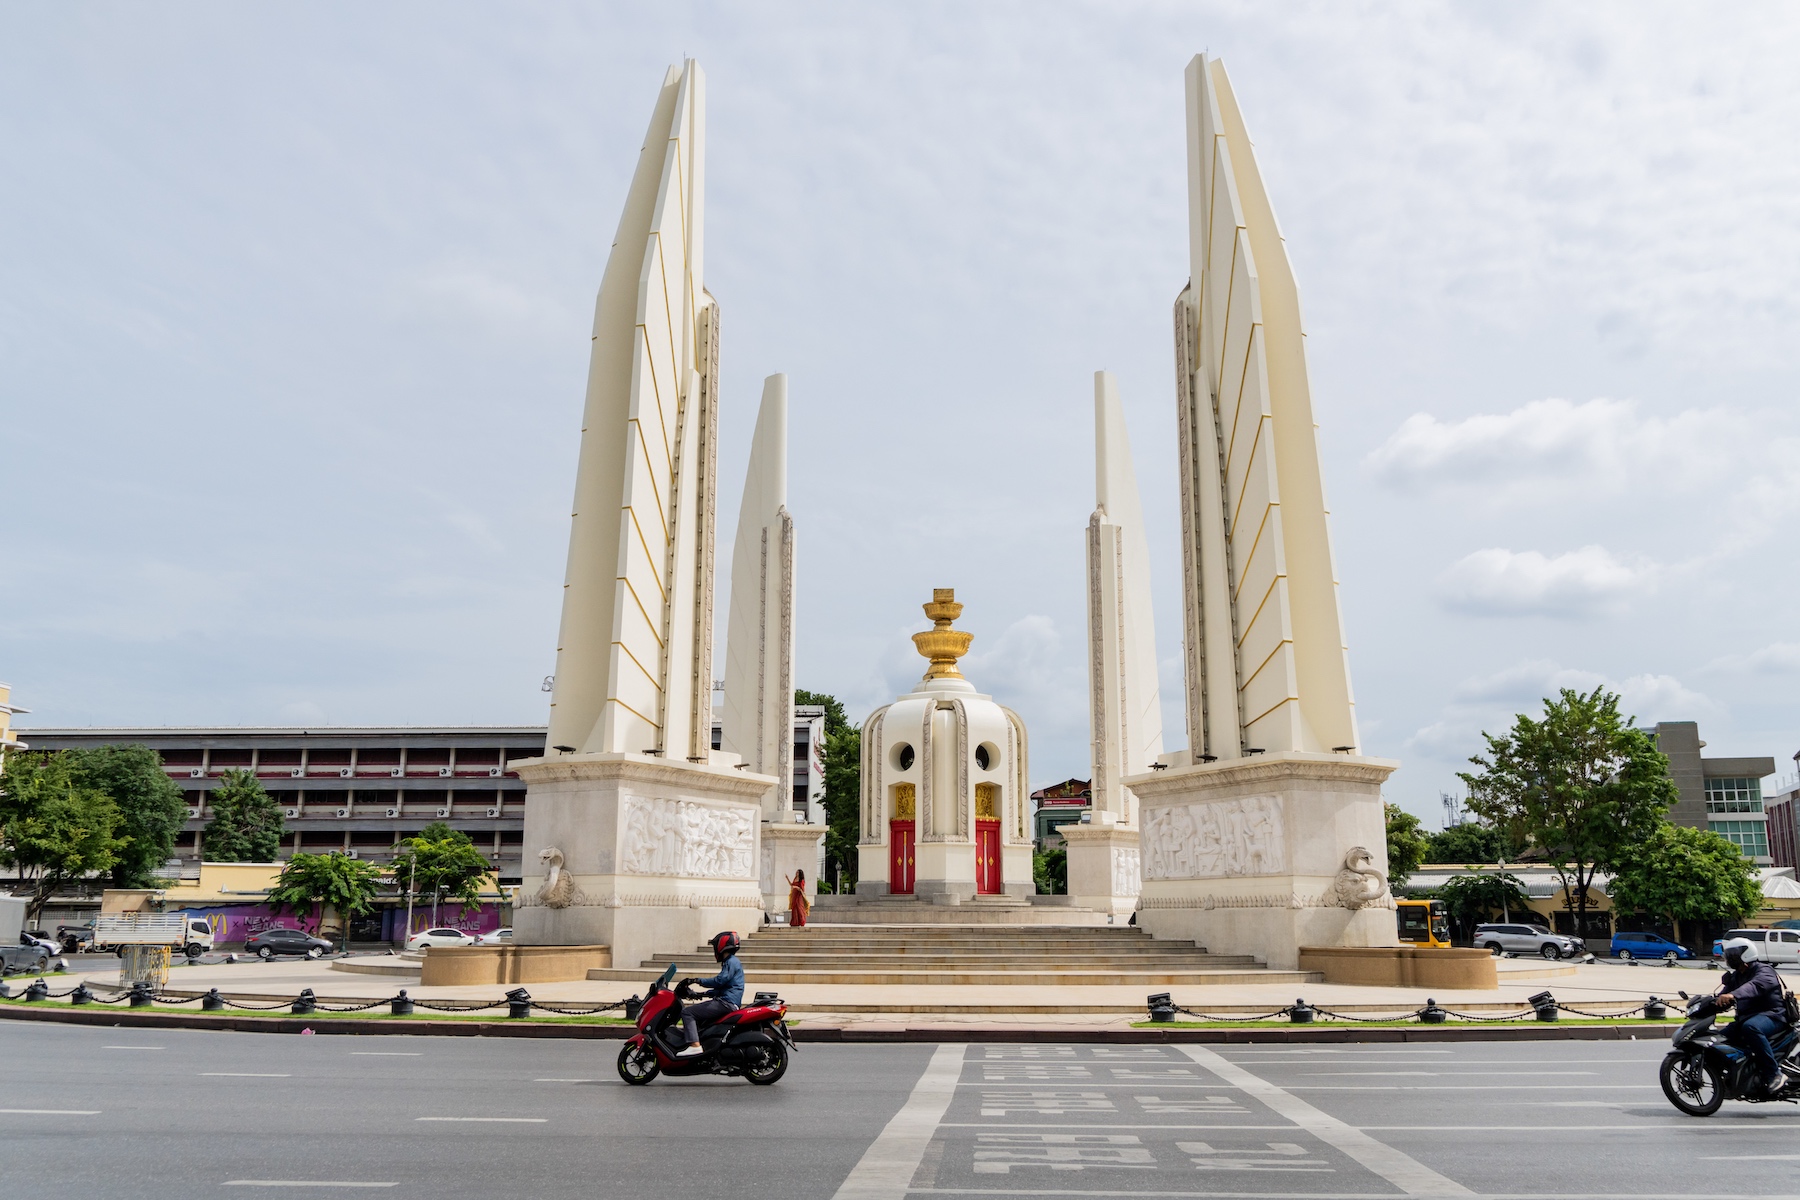 A view of the Democracy Monument in Bangkok, Thailand from across the street as motorcycles go by